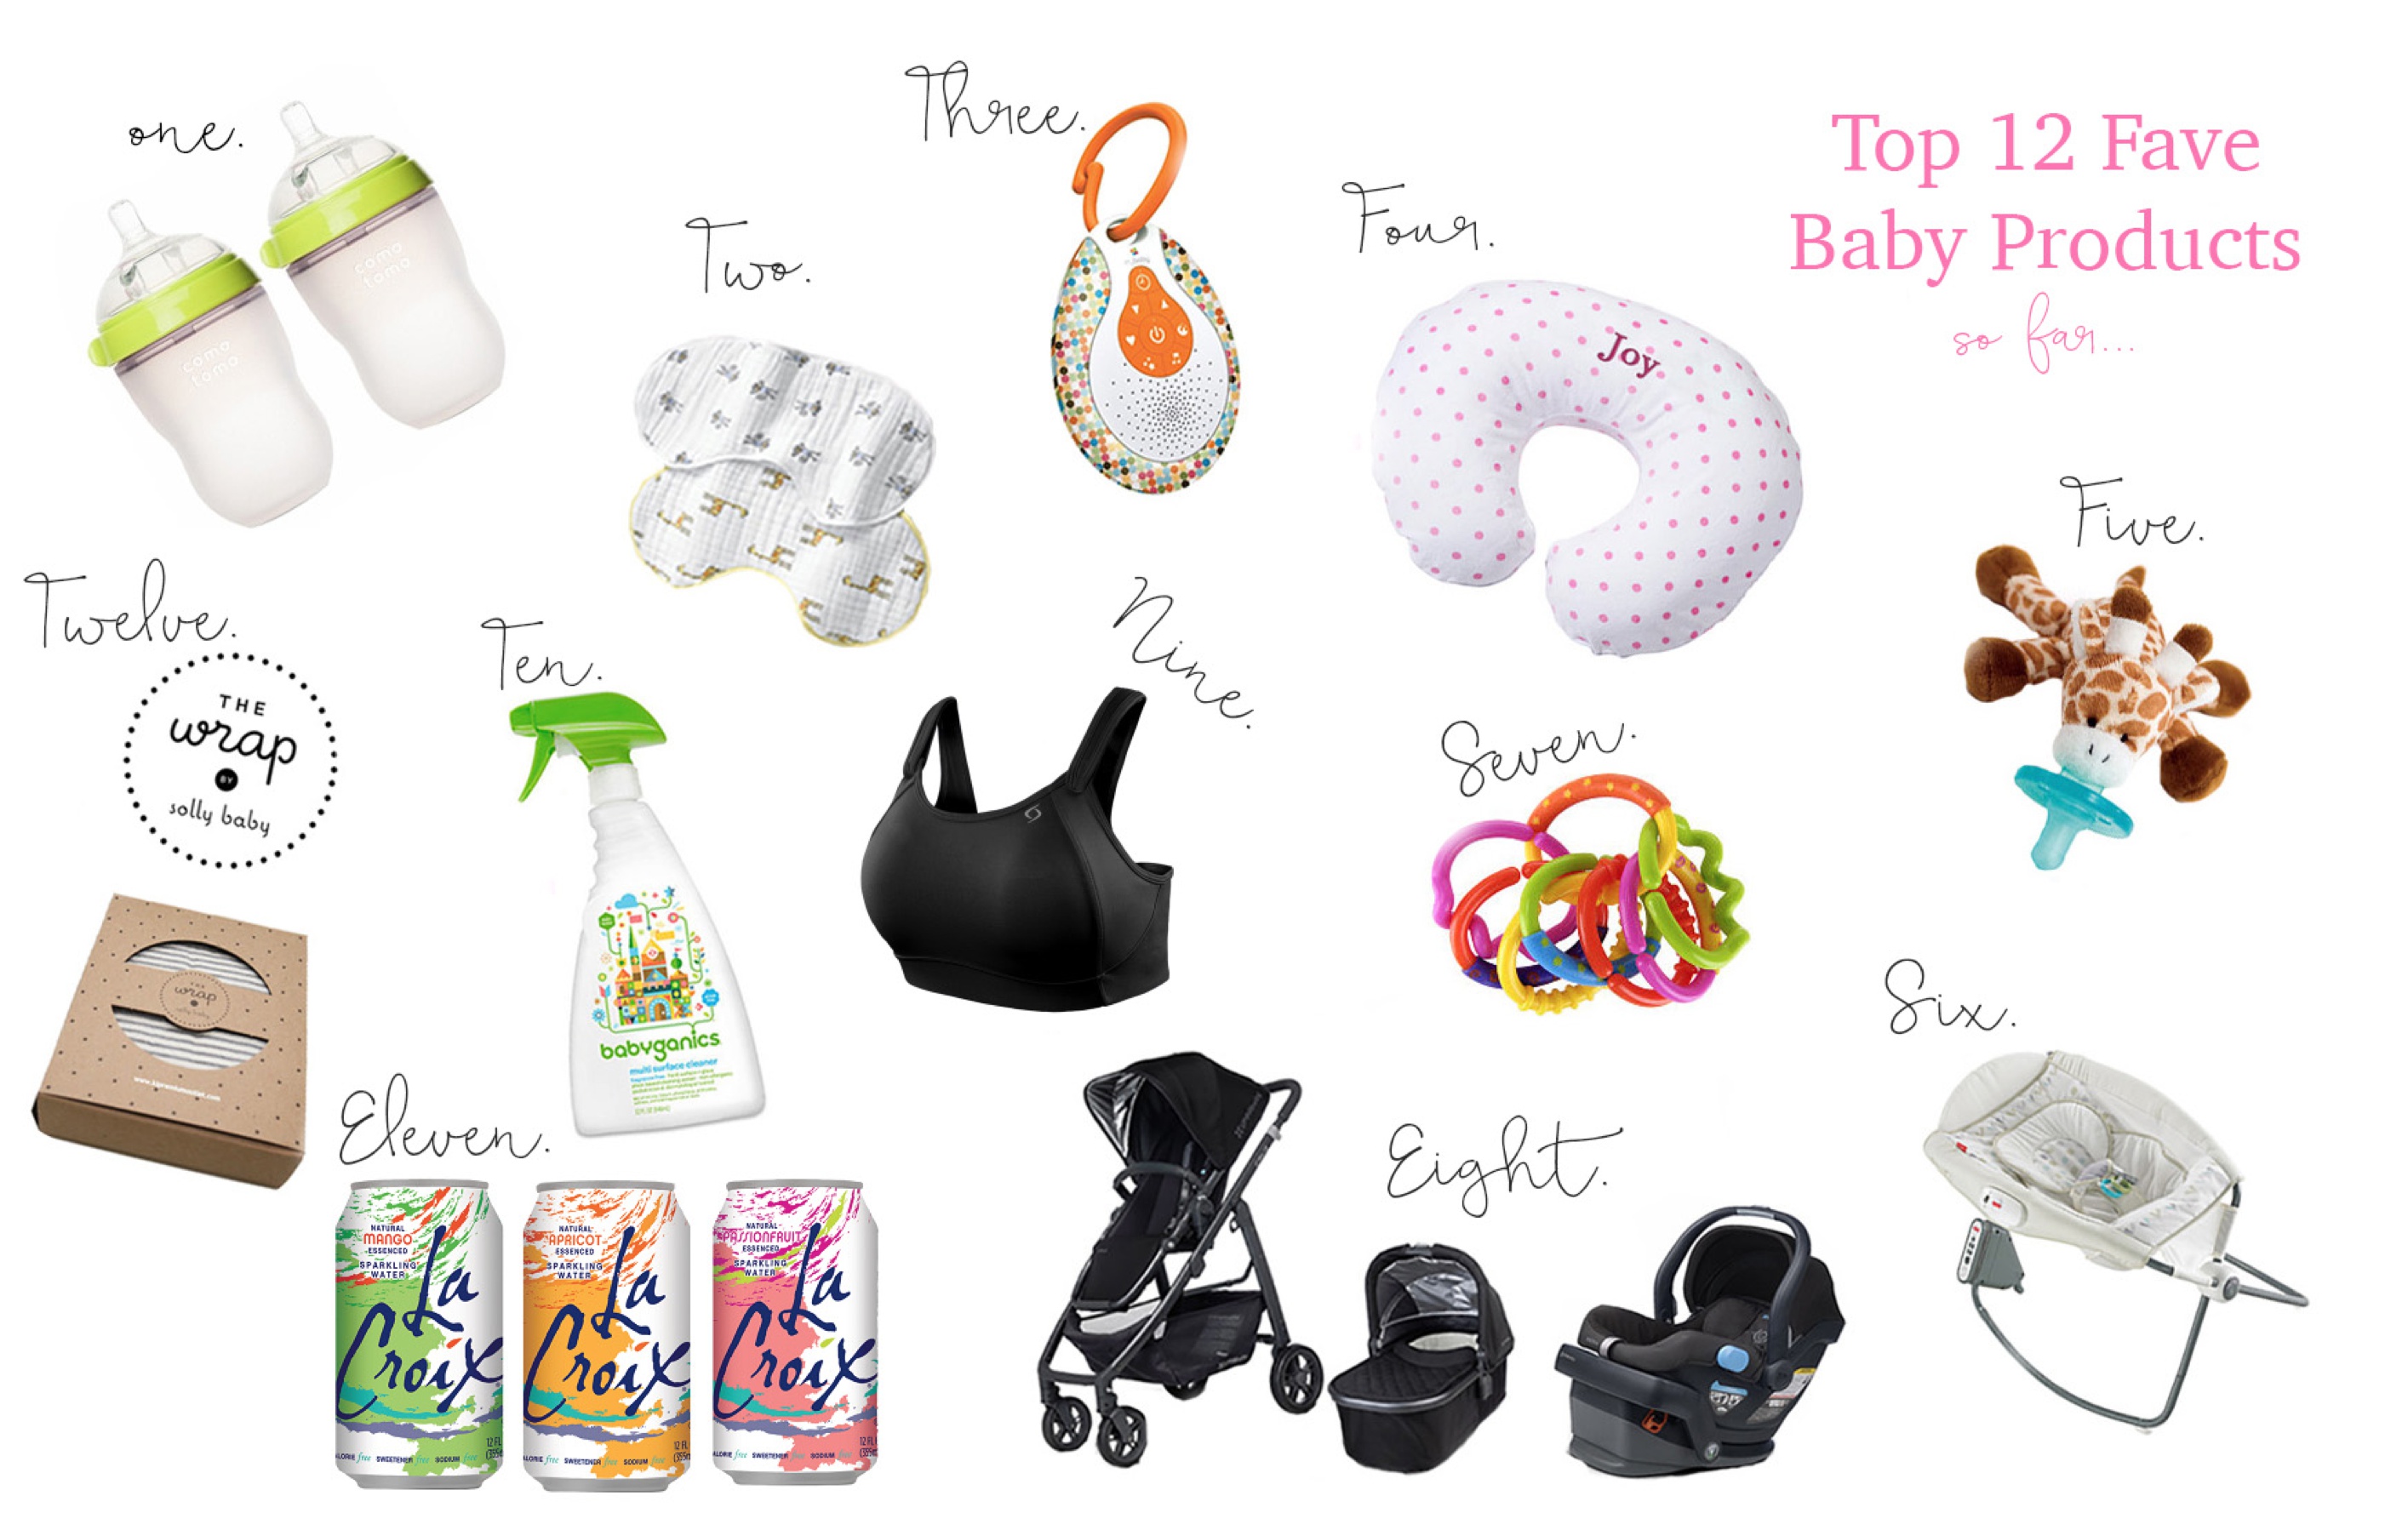 Top 12 Favorite Baby Products so far (@ 4 Mo)-- www.thenewmrsallen.com